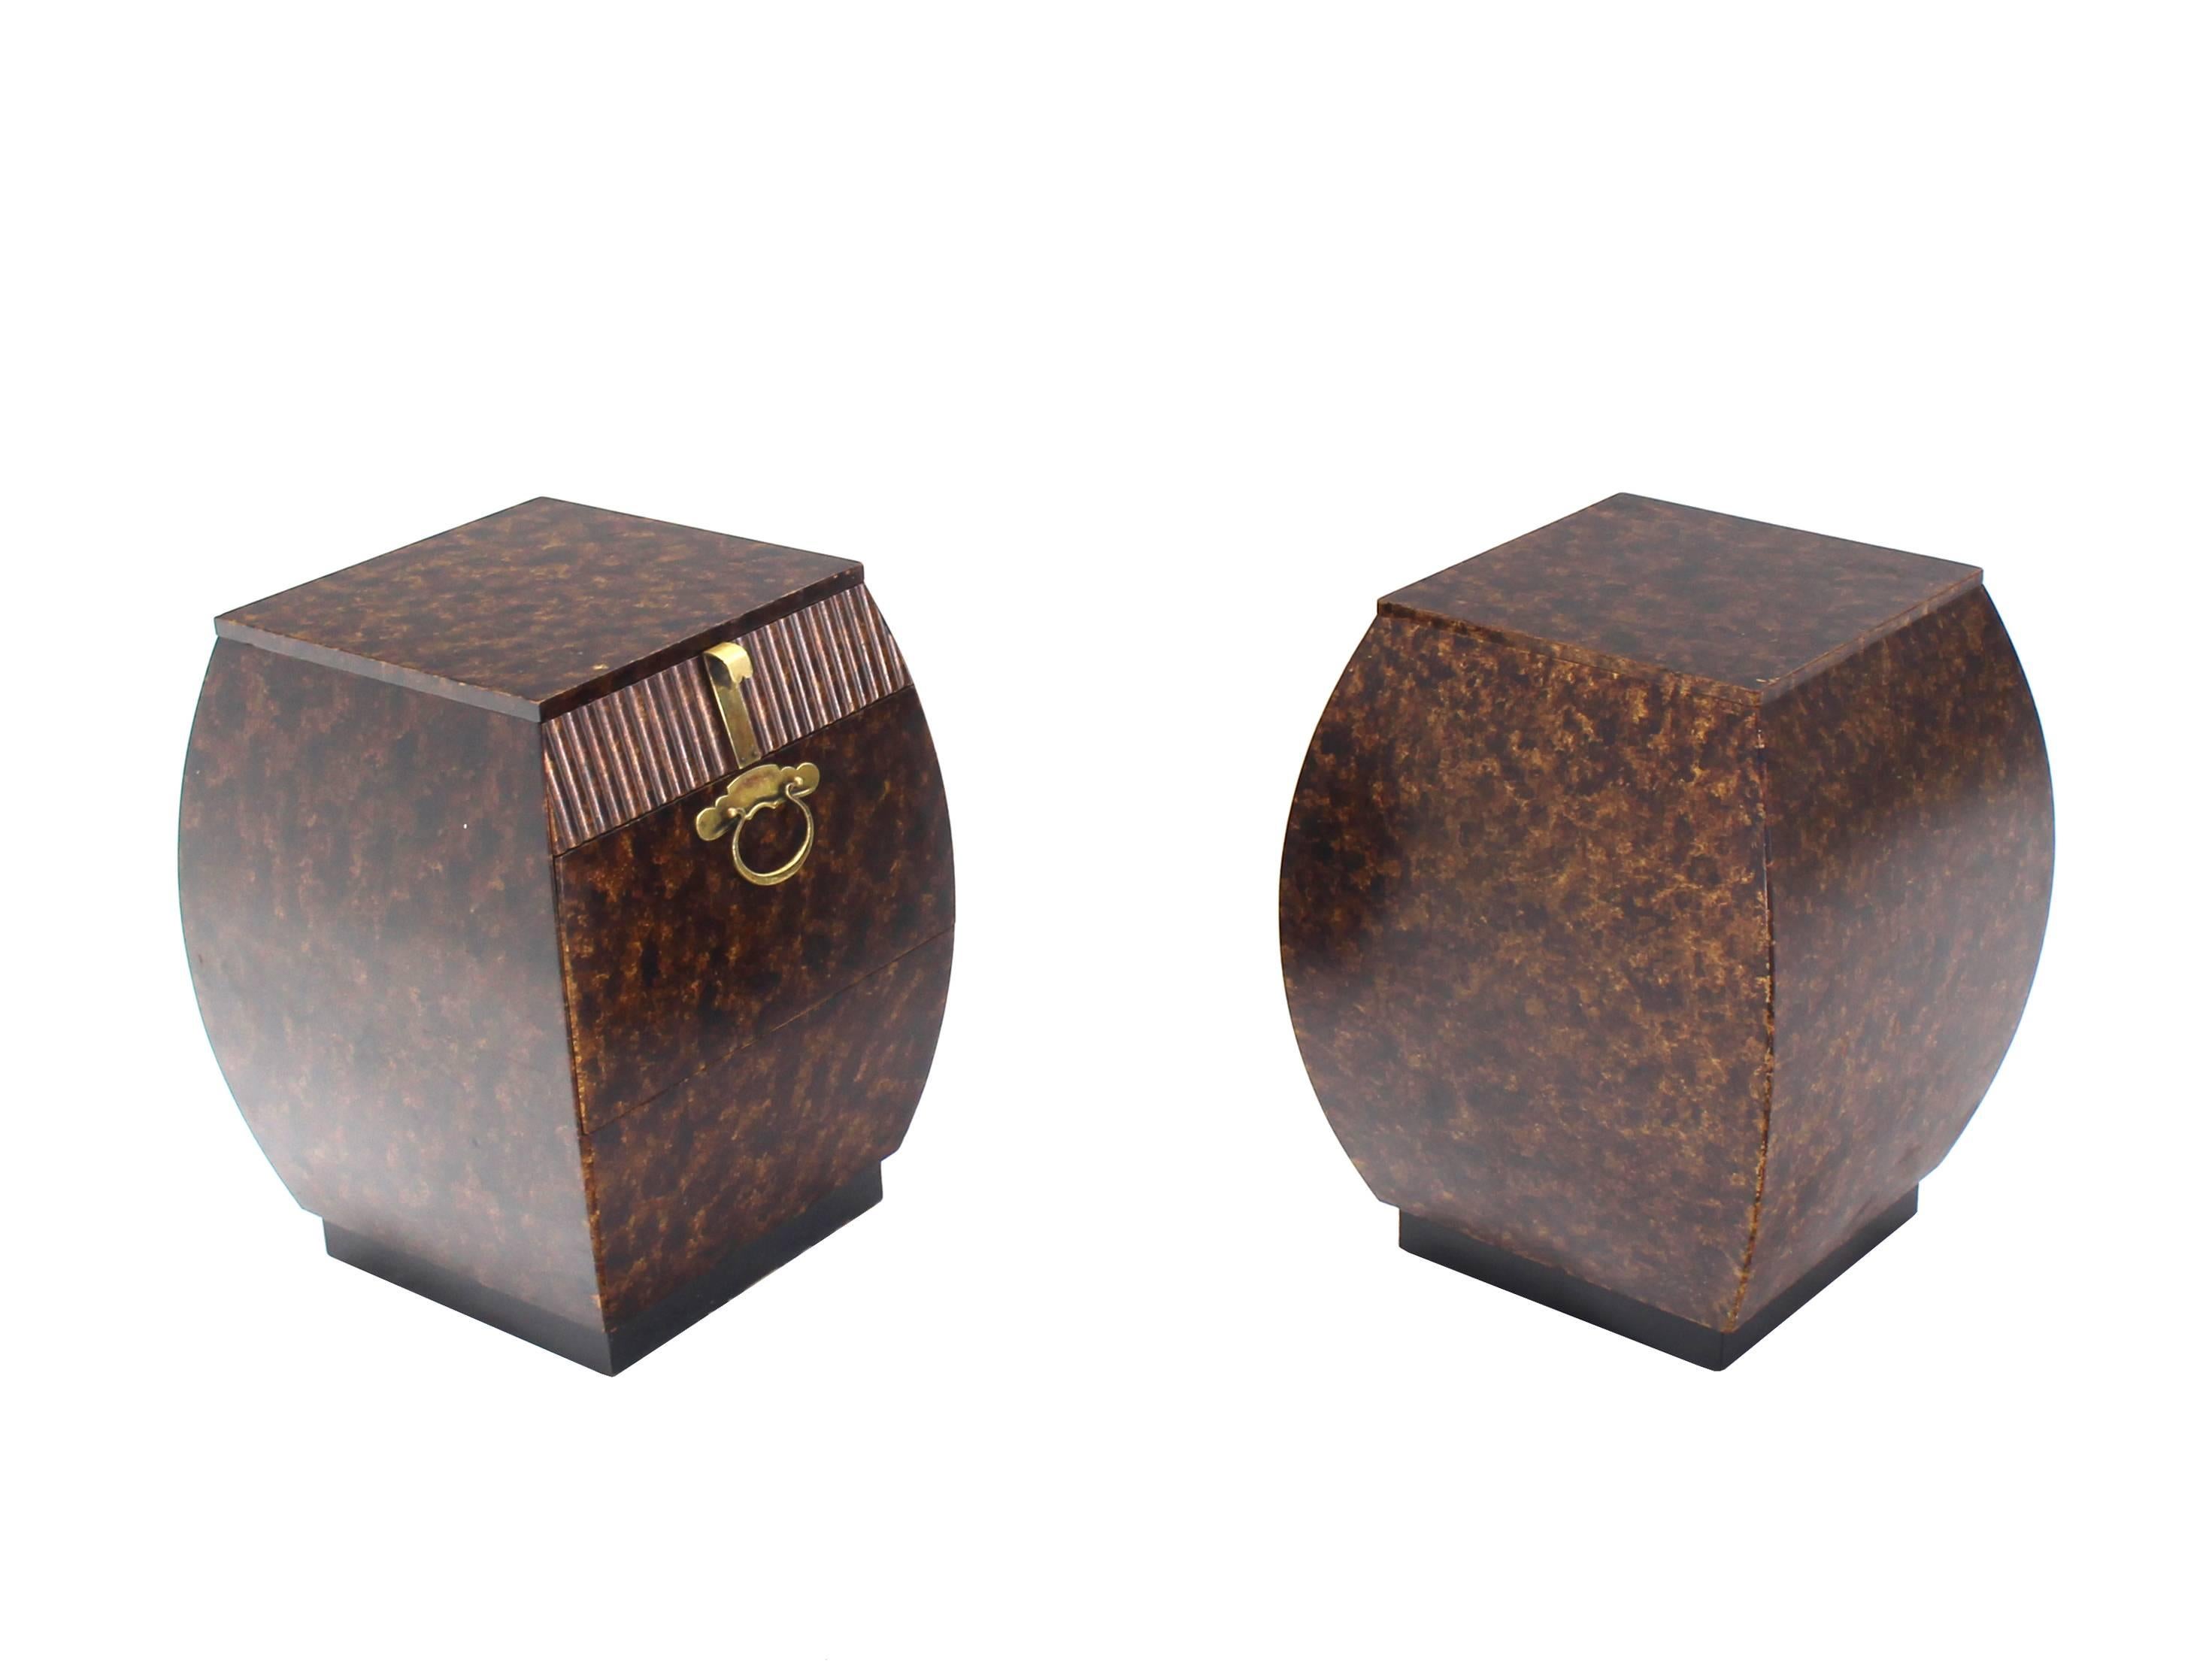 Pair of Mid-Century Modern highly decorative end tables with three drawers by Widdicomb.